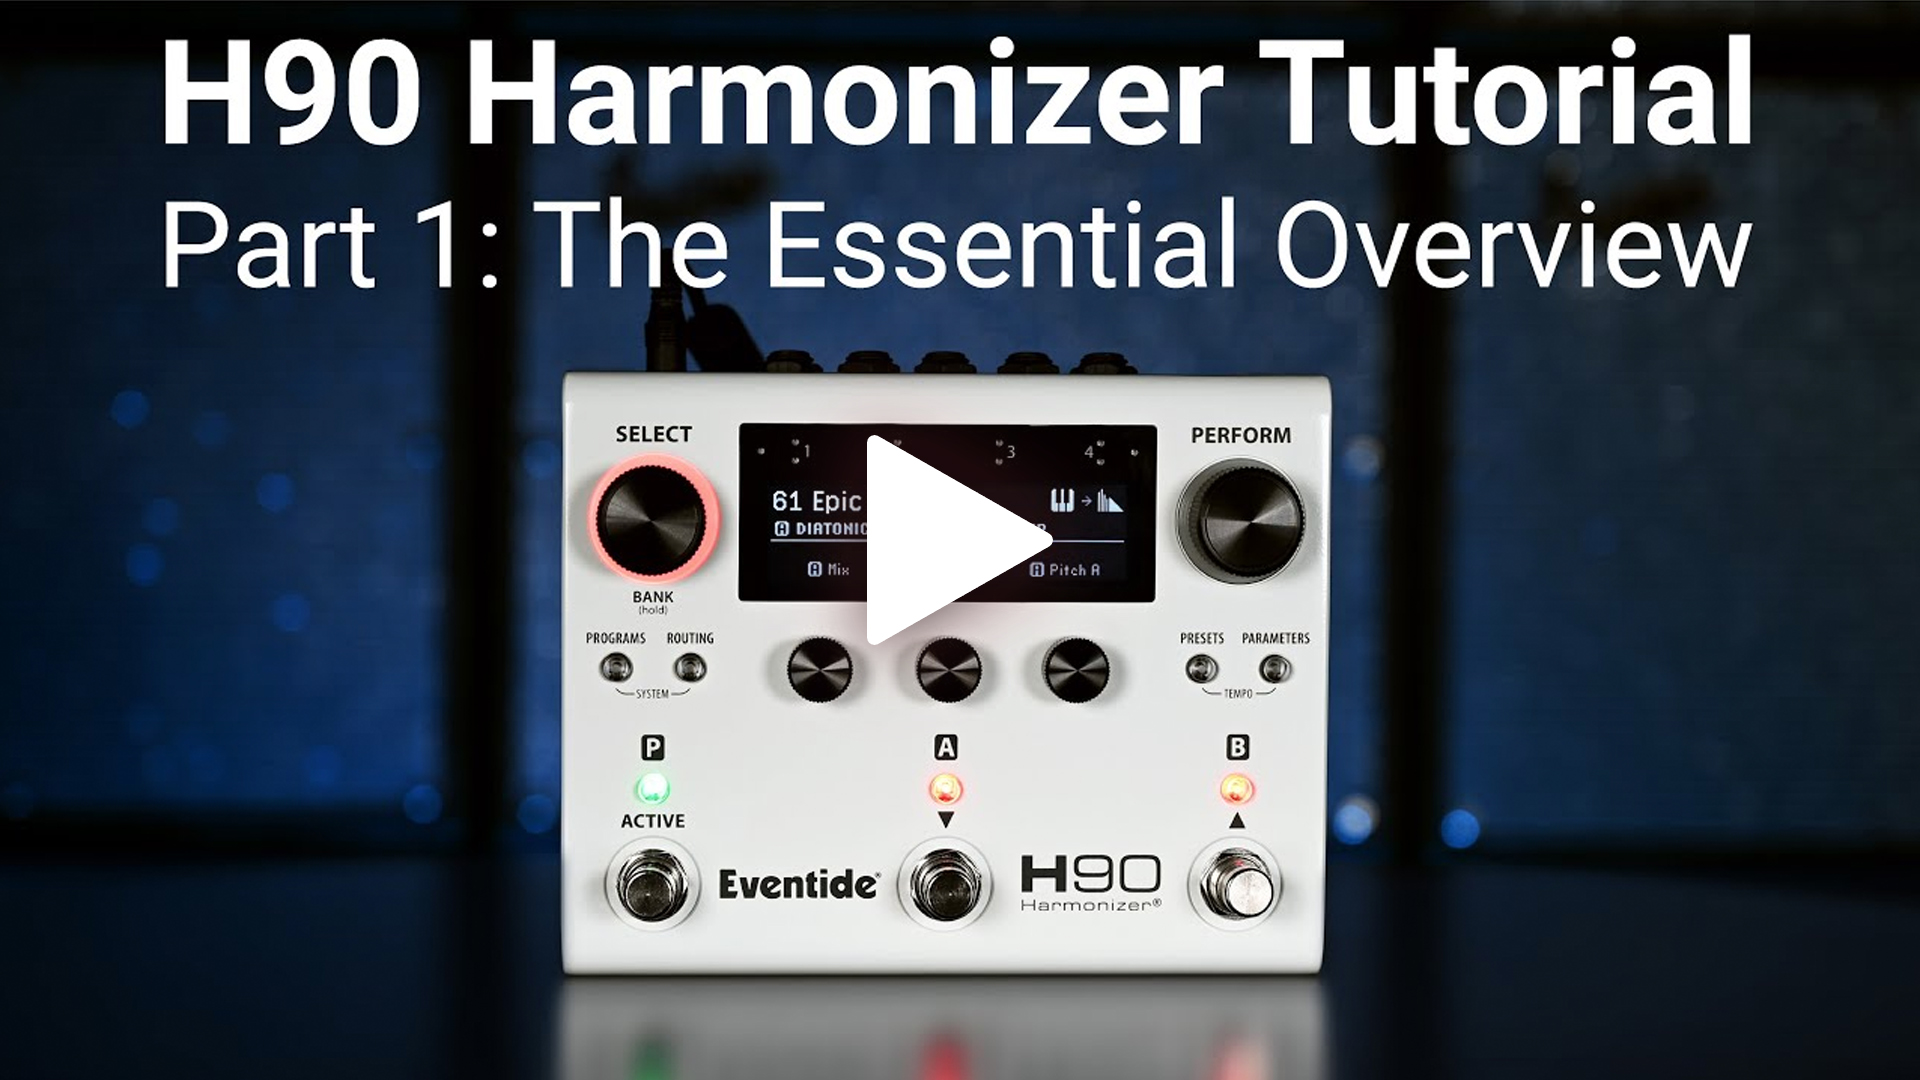 H90 Tutorial - Part 1: The Essential Overview